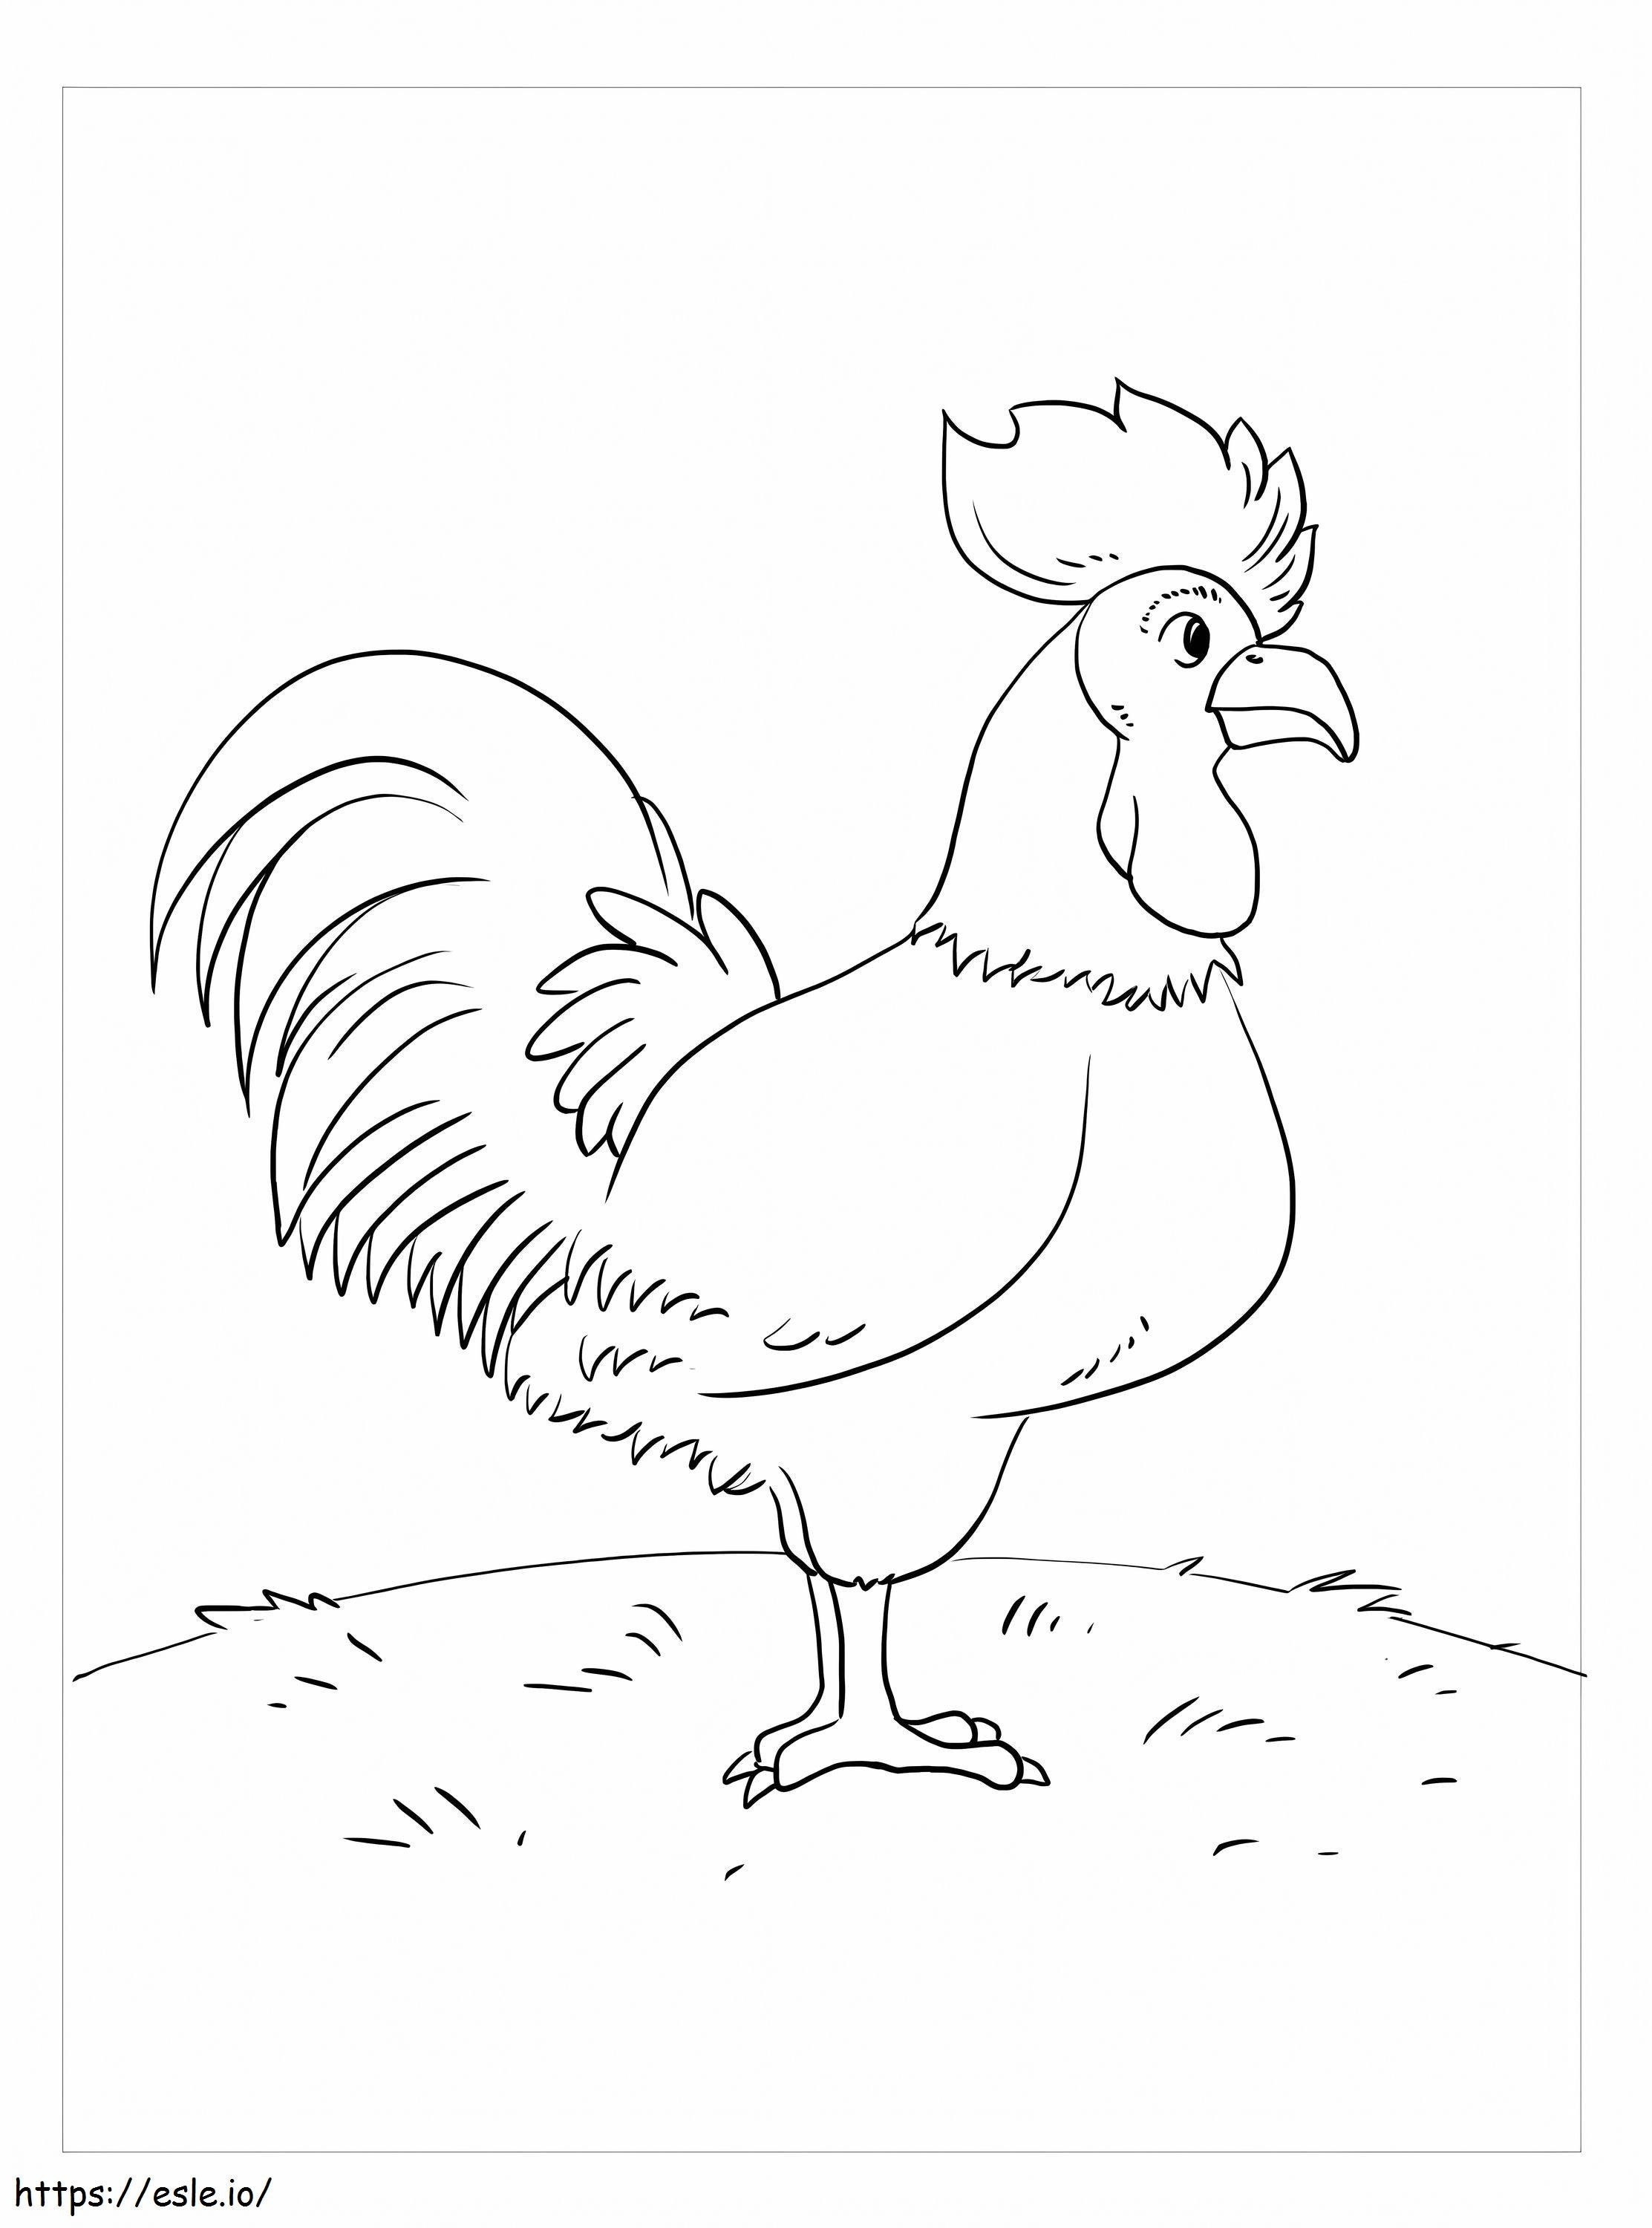 Big Rooster coloring page